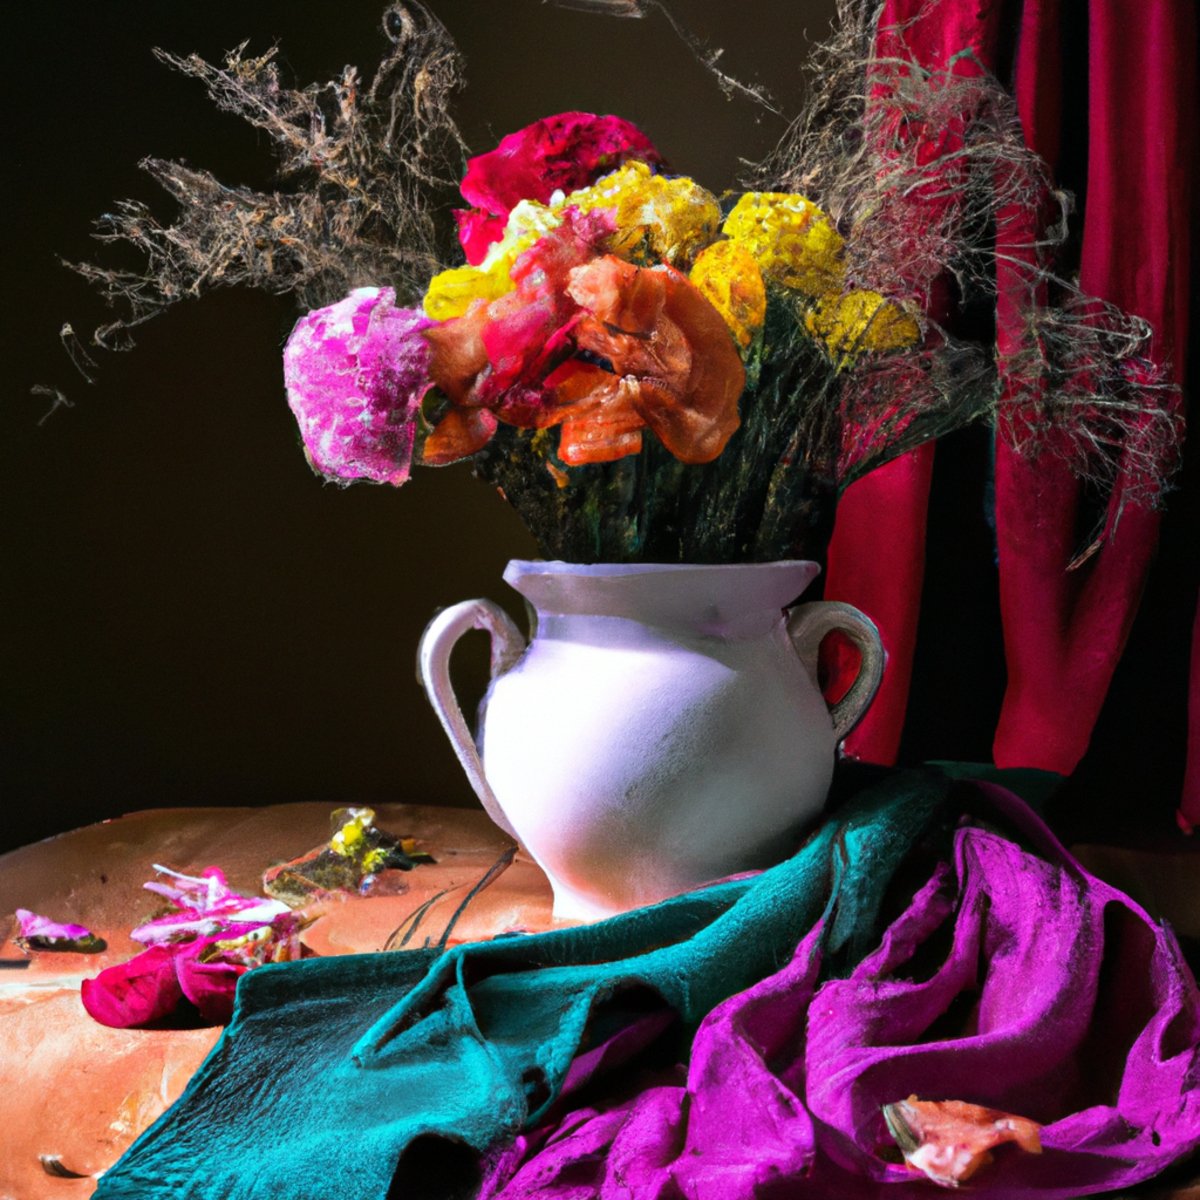 A still life photo of a wooden table with a vase of vibrant flowers, fruit bowl, stack of books, and cup of coffee - Natural Stress Relief.